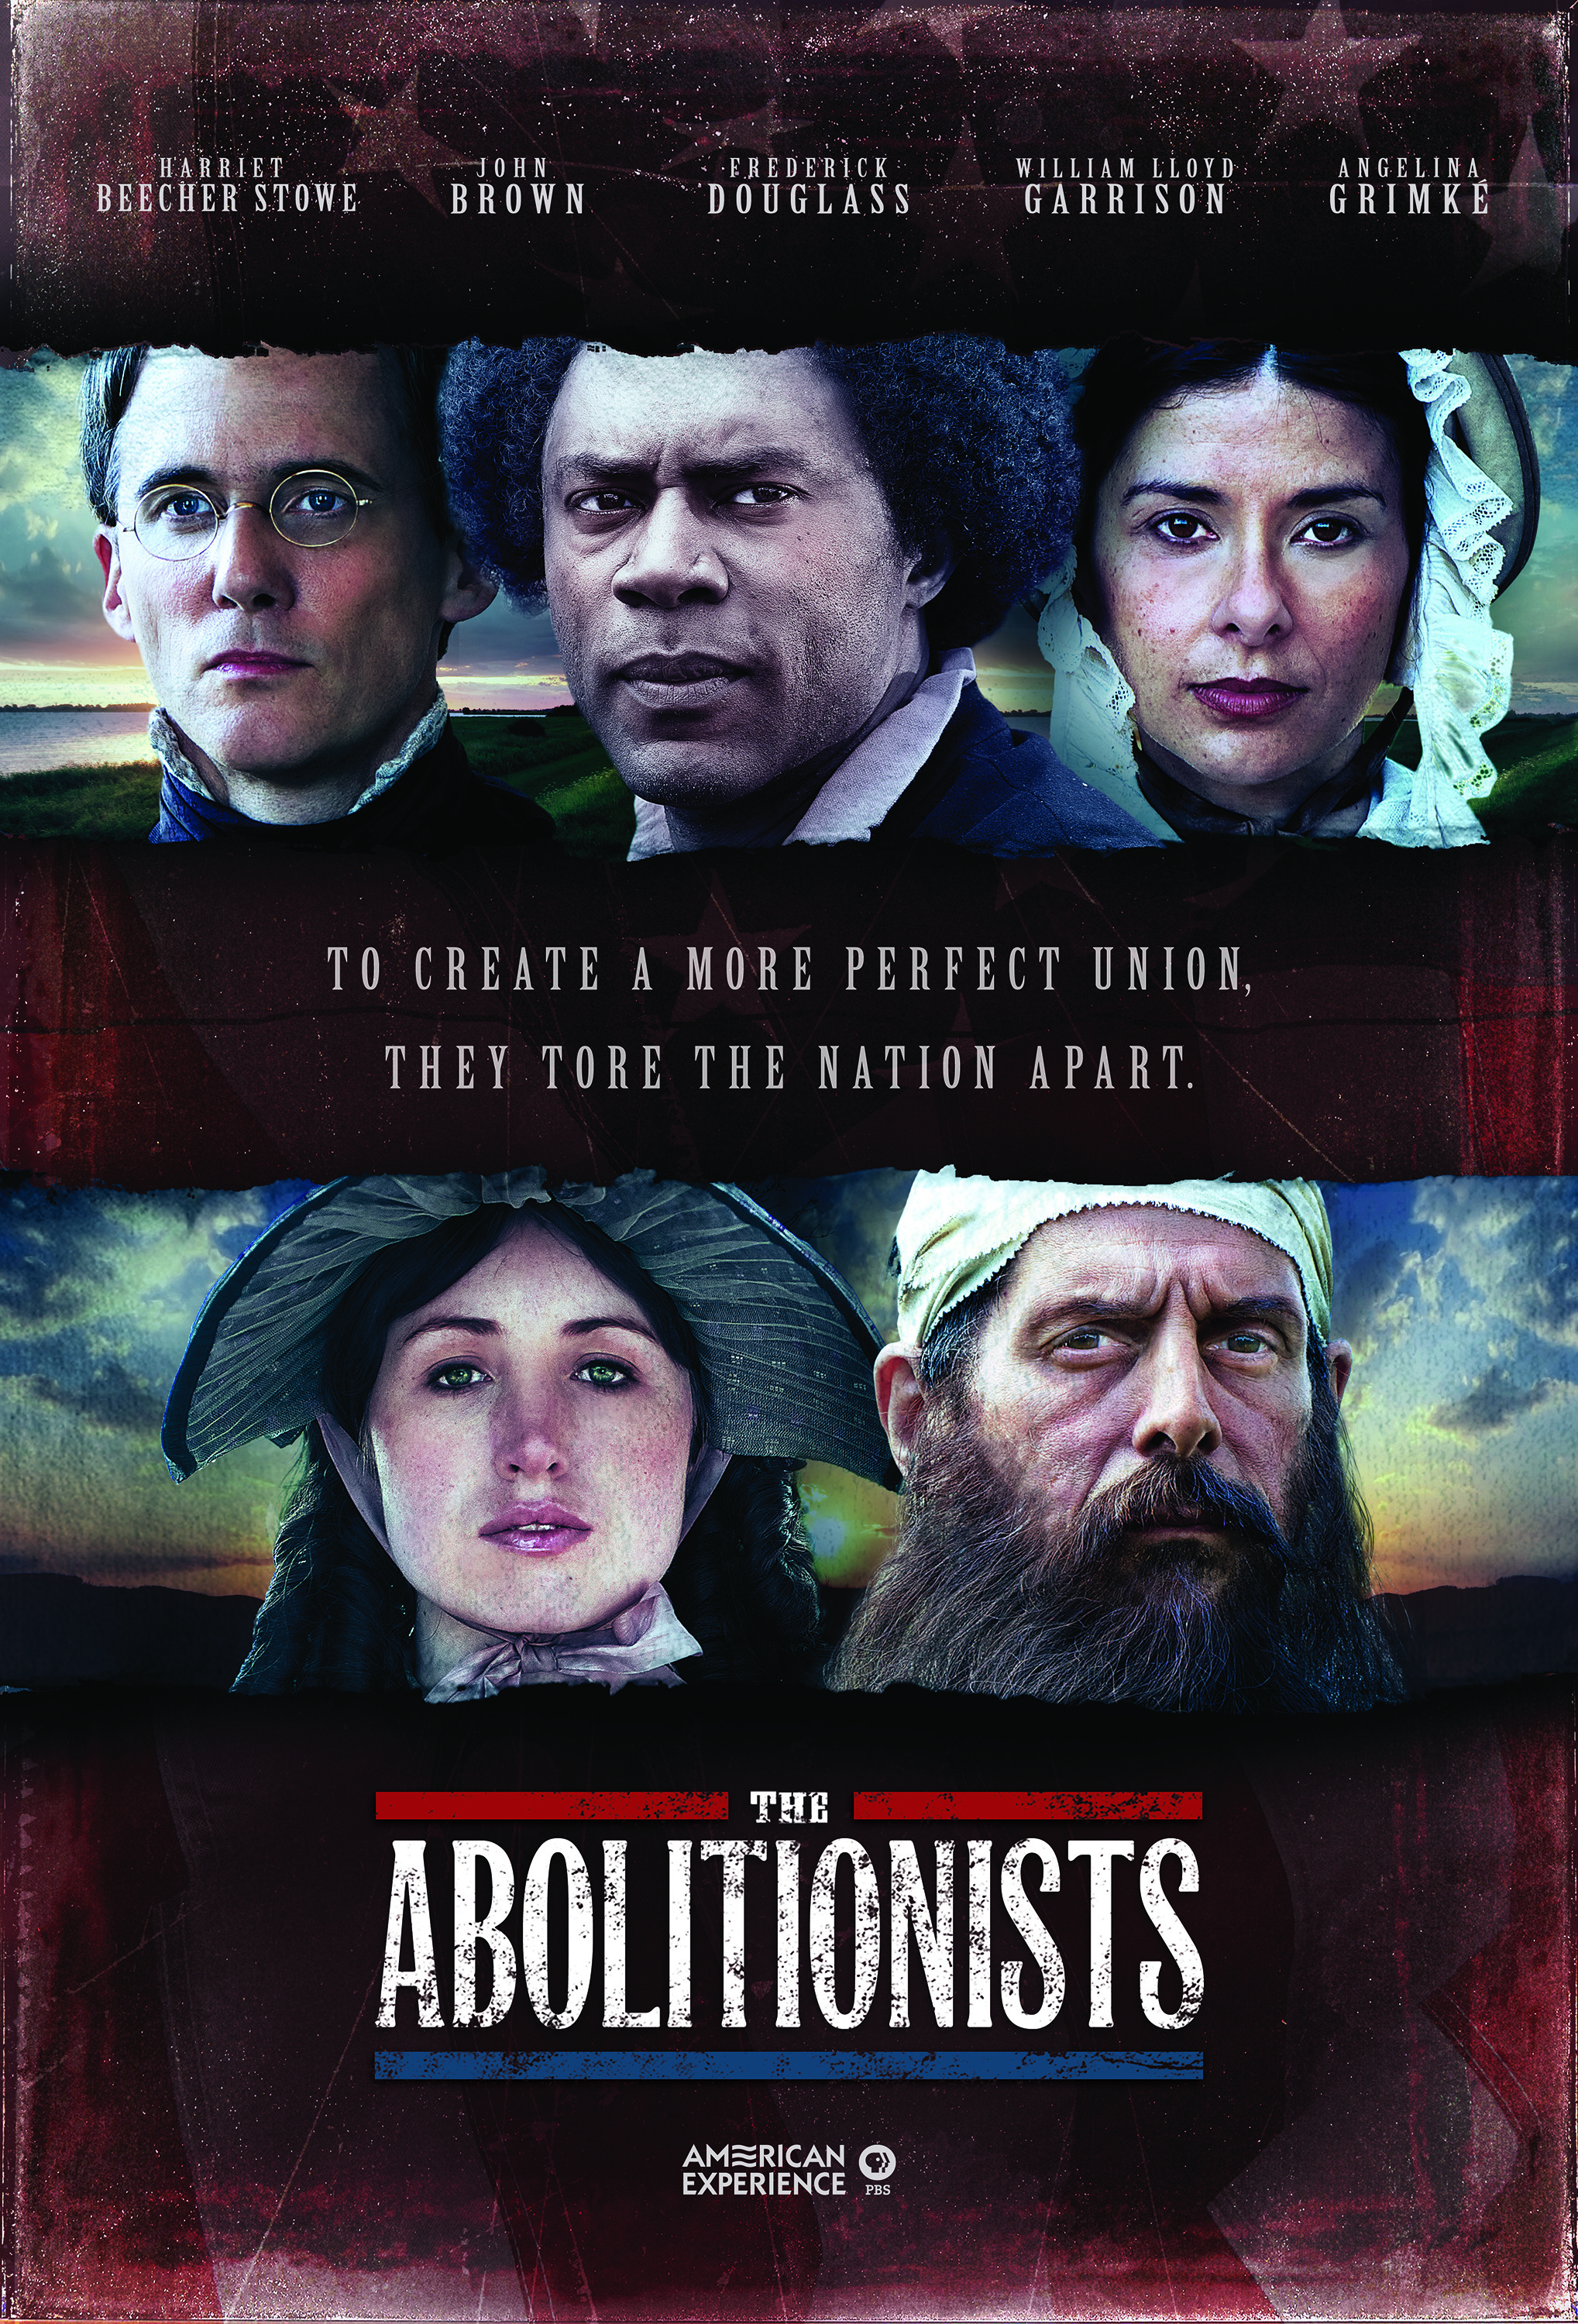 The Abolitionists-American Experience 3 hr series, Rob Rapley Director